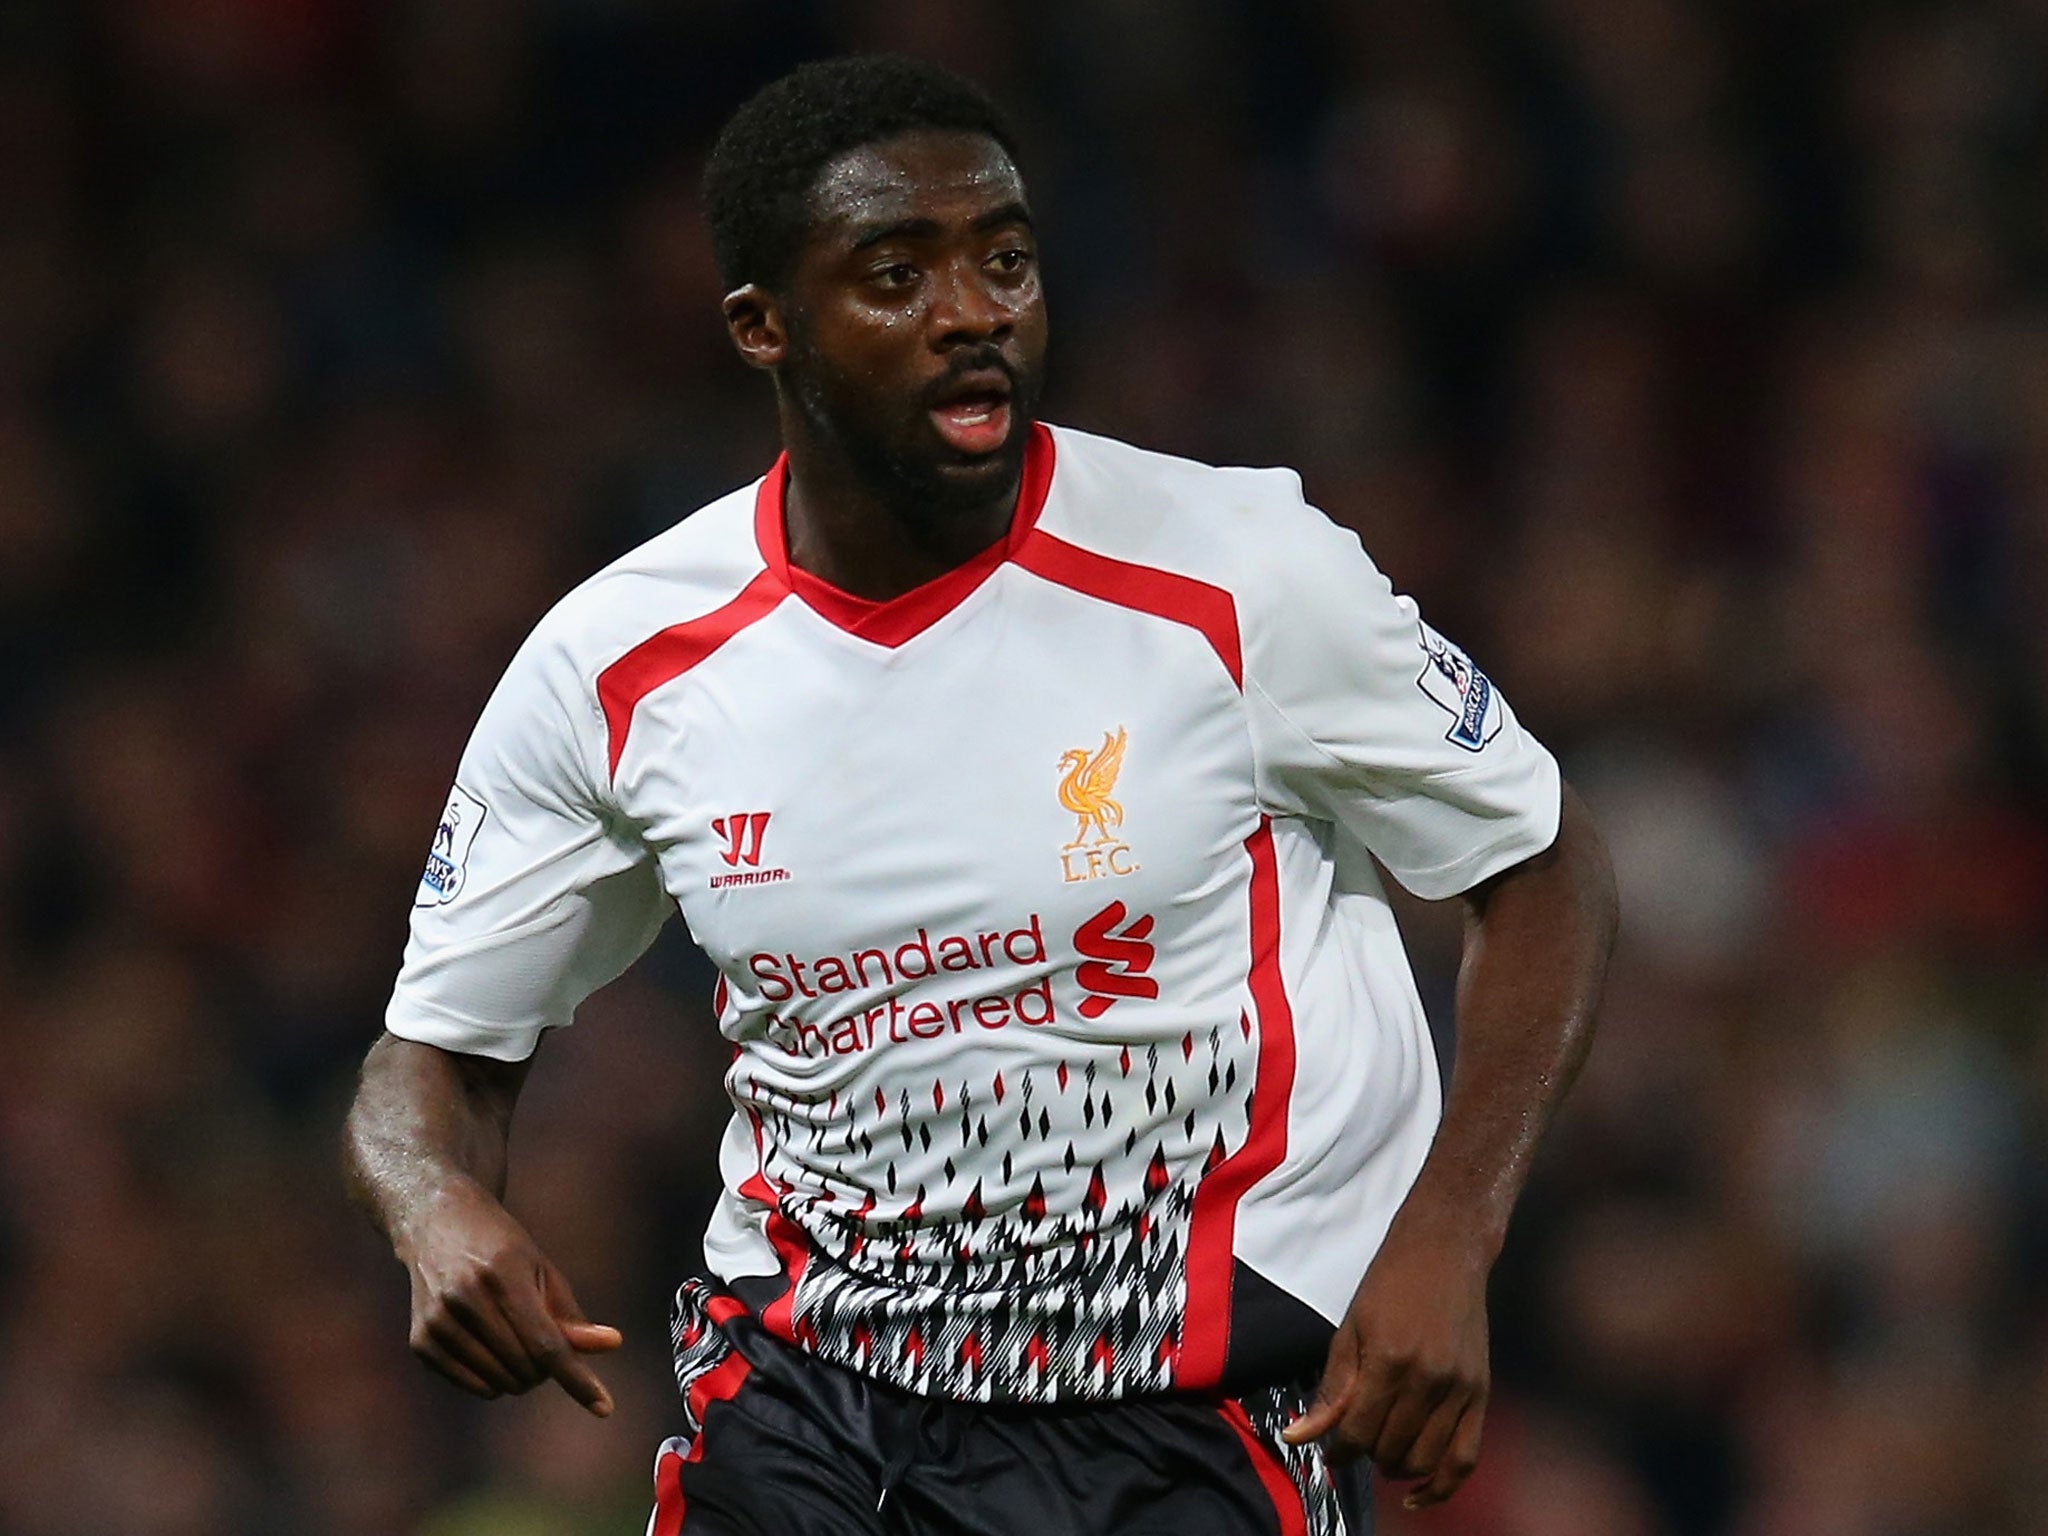 Kolo Toure turned down the Ivory Coast earlier this year